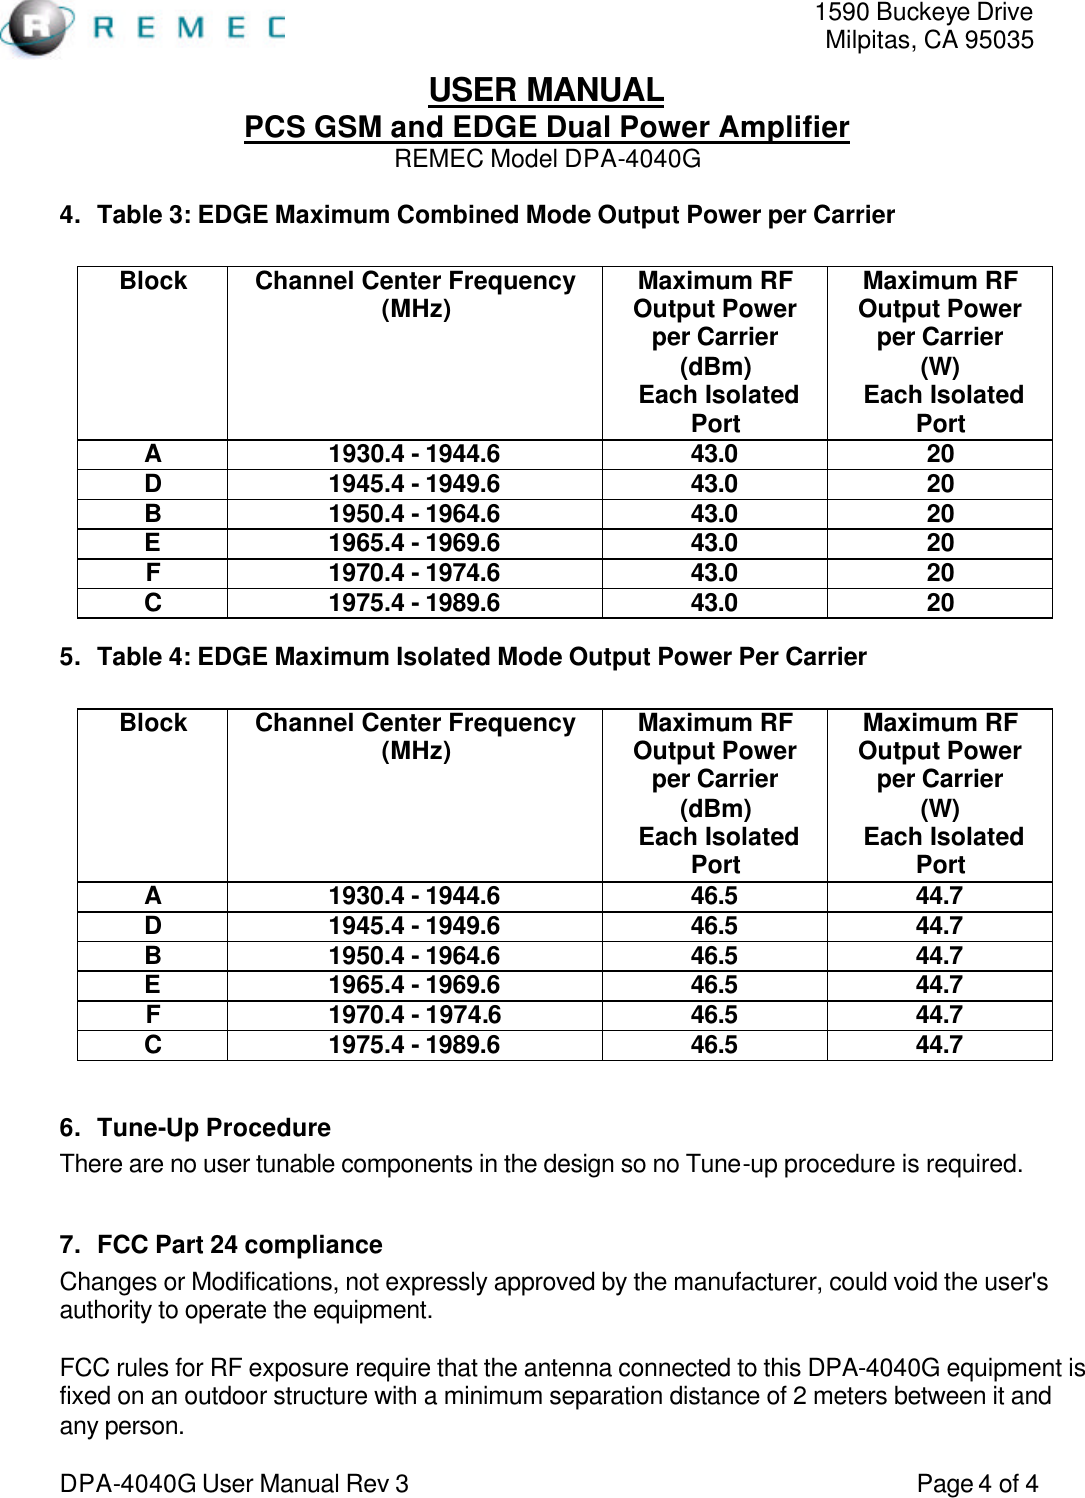   1590 Buckeye Drive Milpitas, CA 95035 USER MANUAL PCS GSM and EDGE Dual Power Amplifier REMEC Model DPA-4040G  DPA-4040G User Manual Rev 3                                                                                 Page 4 of 4 4. Table 3: EDGE Maximum Combined Mode Output Power per Carrier  Block Channel Center Frequency (MHz)  Maximum RF Output Power per Carrier (dBm)  Each Isolated Port Maximum RF Output Power per Carrier (W)  Each Isolated Port A 1930.4 - 1944.6 43.0 20 D 1945.4 - 1949.6 43.0 20 B 1950.4 - 1964.6 43.0 20 E 1965.4 - 1969.6 43.0 20 F 1970.4 - 1974.6 43.0 20 C 1975.4 - 1989.6 43.0 20 5. Table 4: EDGE Maximum Isolated Mode Output Power Per Carrier  Block Channel Center Frequency (MHz)  Maximum RF Output Power per Carrier (dBm)  Each Isolated Port Maximum RF Output Power per Carrier (W)  Each Isolated Port A 1930.4 - 1944.6 46.5 44.7 D 1945.4 - 1949.6 46.5 44.7 B 1950.4 - 1964.6 46.5 44.7 E 1965.4 - 1969.6 46.5 44.7 F 1970.4 - 1974.6 46.5 44.7 C 1975.4 - 1989.6 46.5 44.7  6. Tune-Up Procedure There are no user tunable components in the design so no Tune-up procedure is required.  7. FCC Part 24 compliance Changes or Modifications, not expressly approved by the manufacturer, could void the user&apos;s authority to operate the equipment.  FCC rules for RF exposure require that the antenna connected to this DPA-4040G equipment is fixed on an outdoor structure with a minimum separation distance of 2 meters between it and any person. 